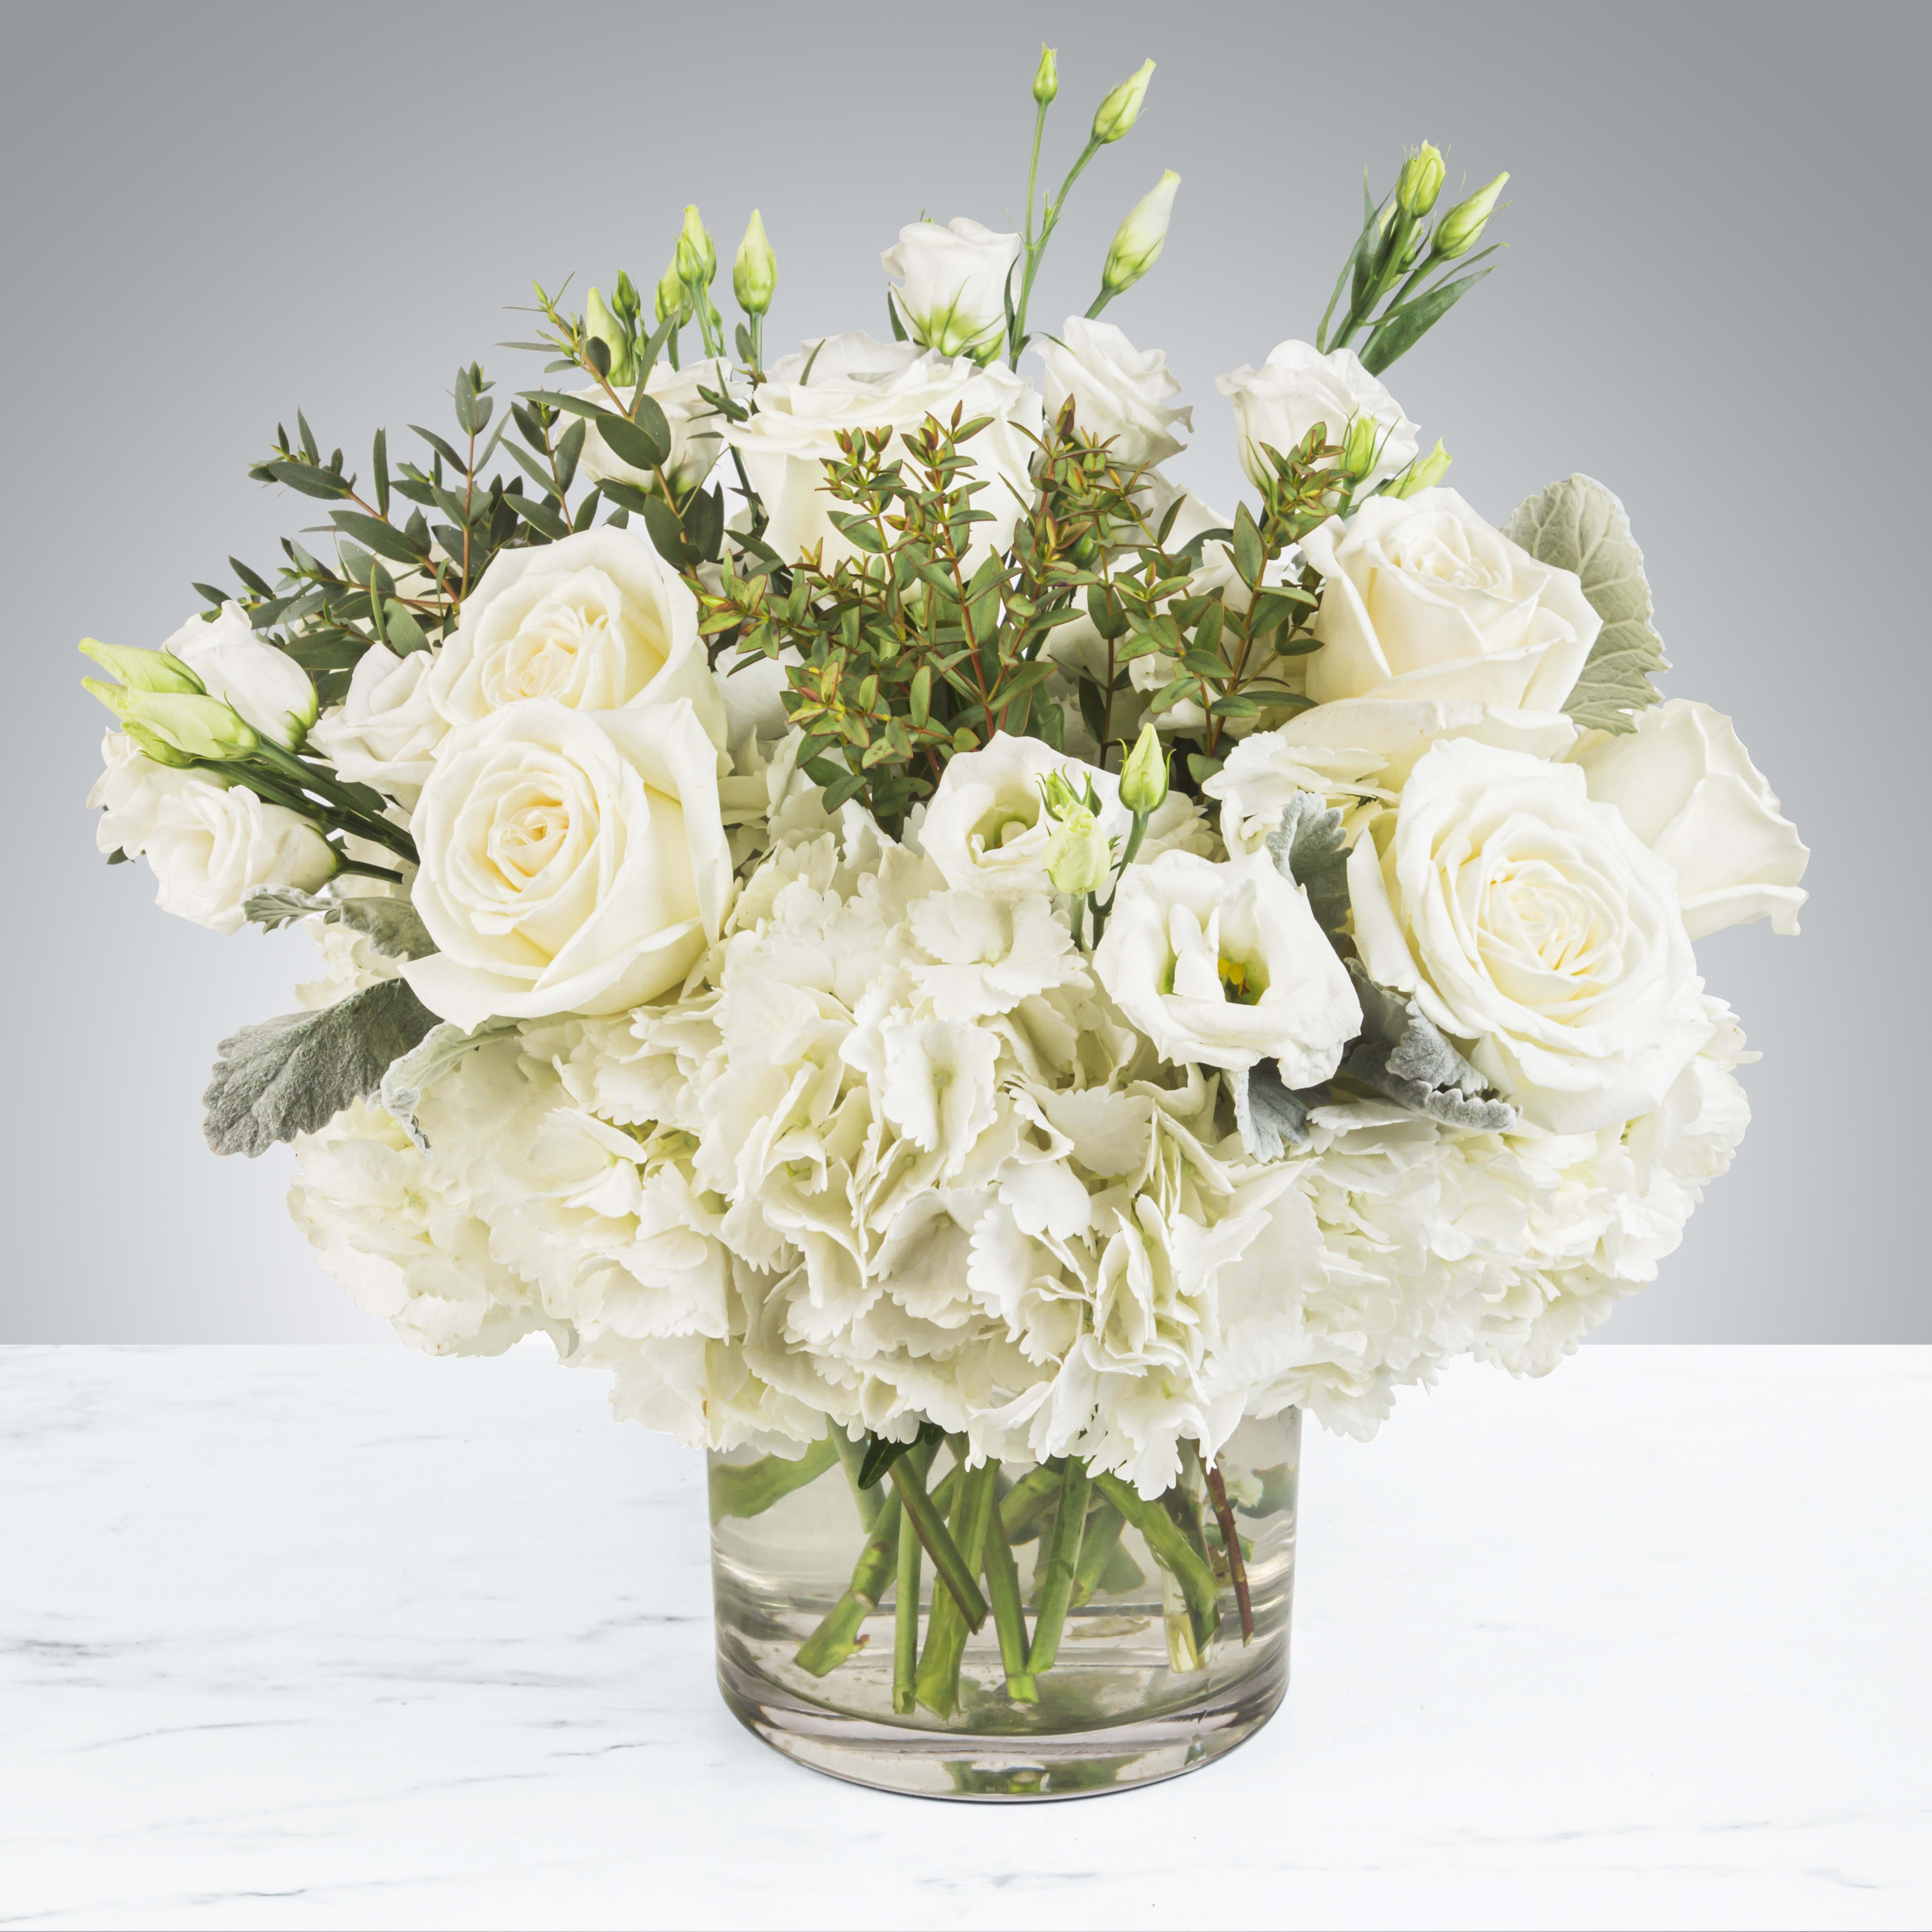 Cloud Nine by Mary Blooms  - New beginnings deserve flowers! This all white arrangement includes roses, lisianthus and hydrangeas. Cloud Nine by Mary Blooms is the perfect gift for celebrating a new year, a new baby, or a newly married couple.   APPROXIMATE DIMENSIONS 15&quot; W X 13&quot; H